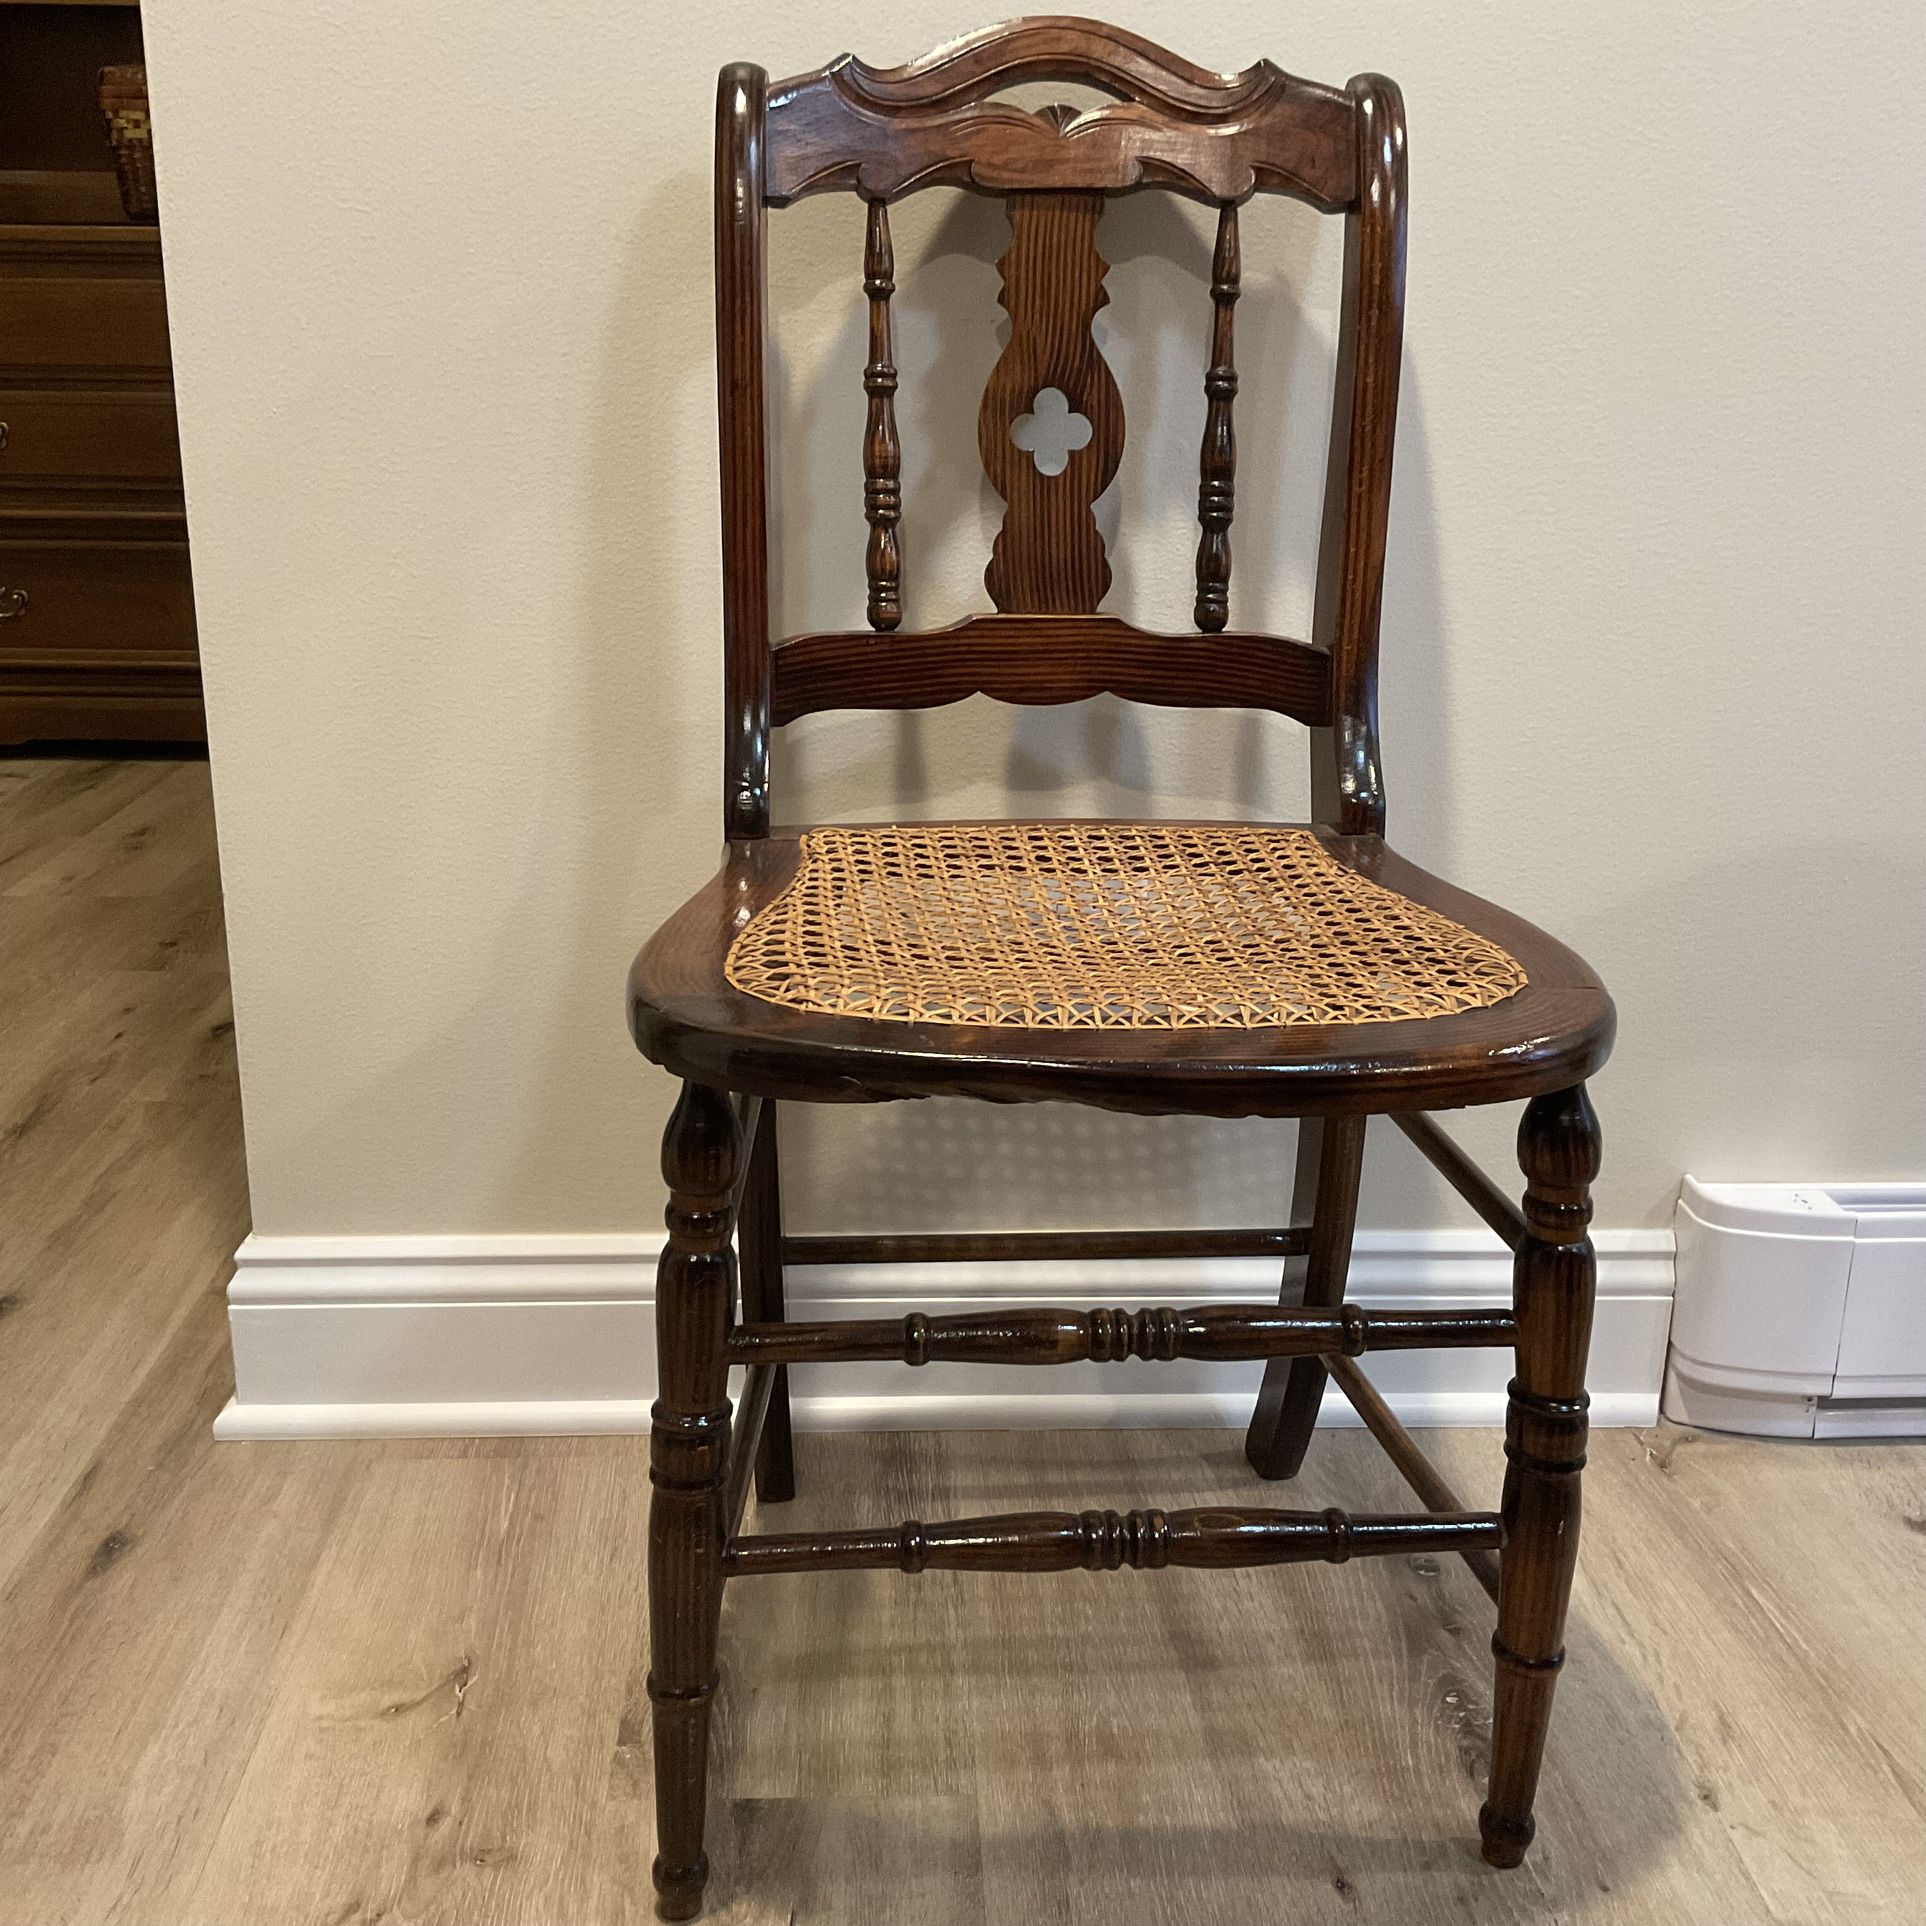 ANTIQUE HAND CARVED WOOD ACCENT CHAIR